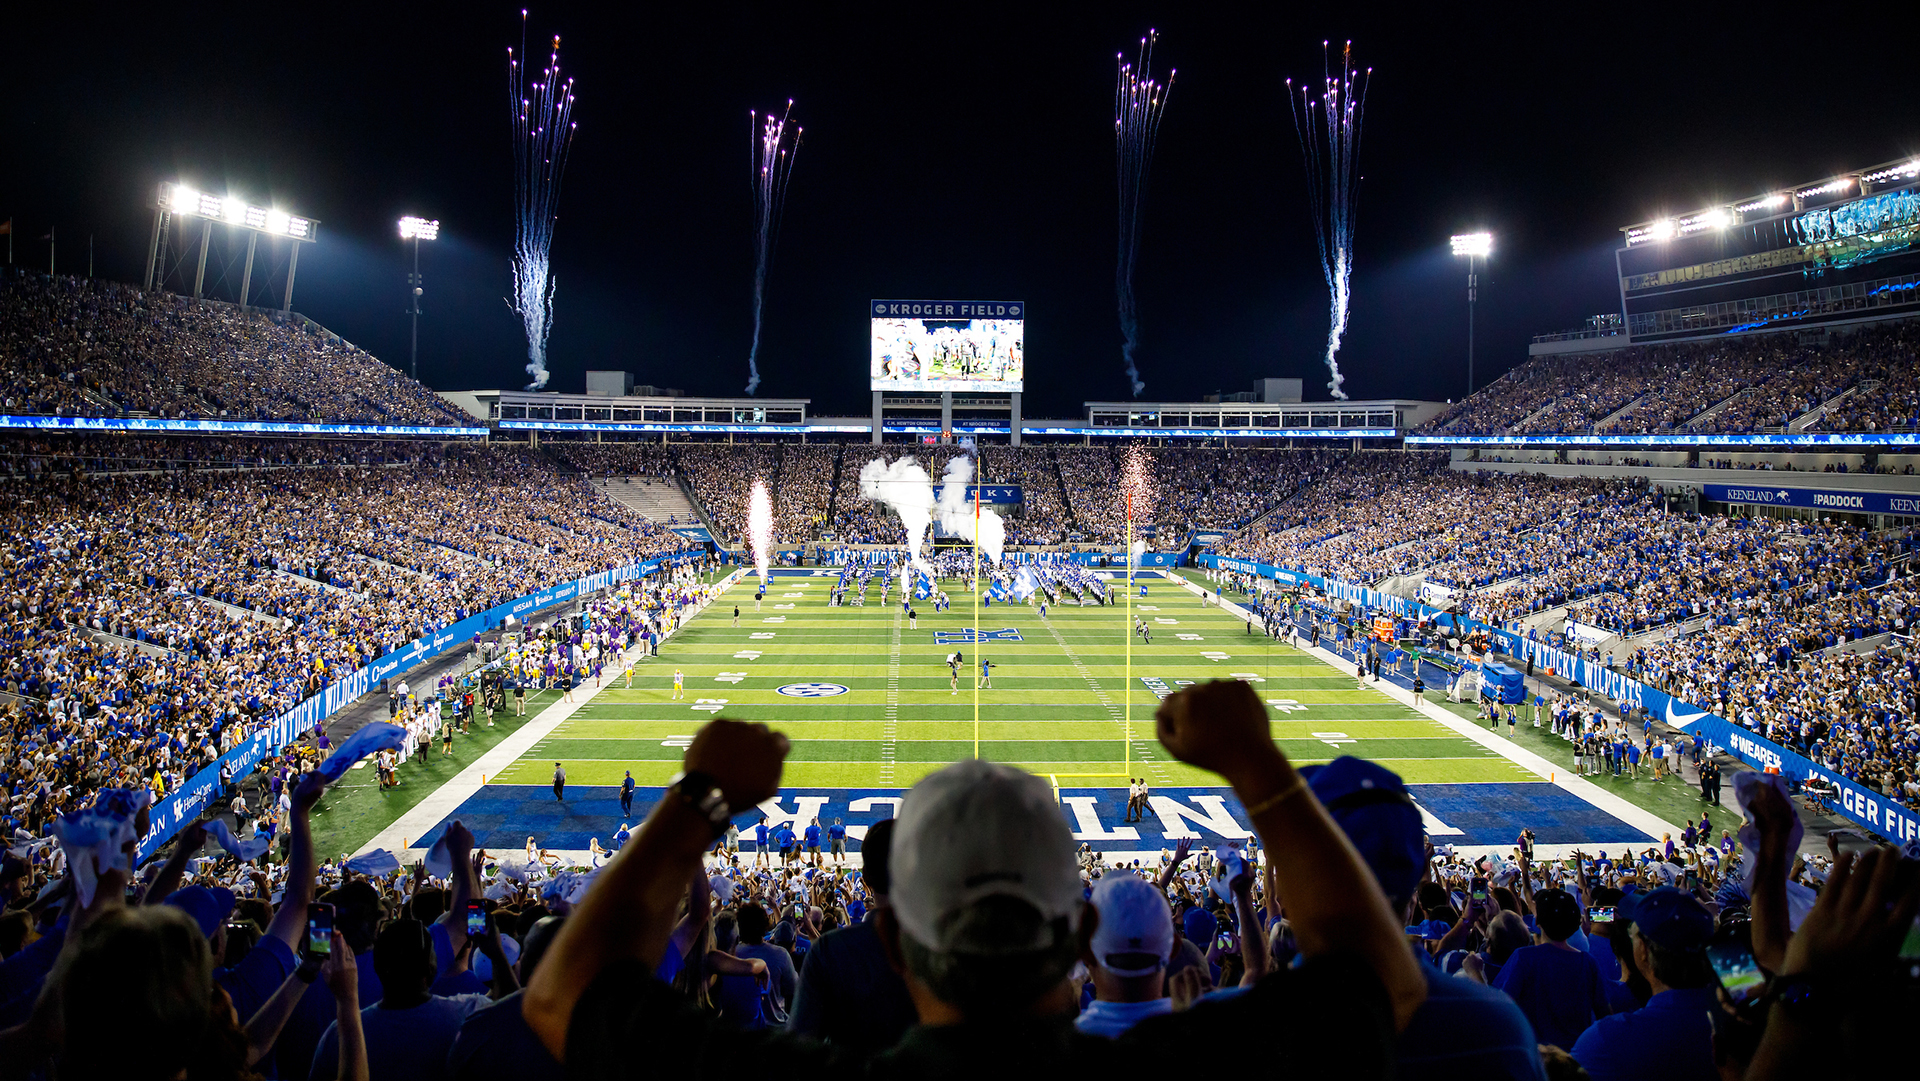 Single Game Sales & Promotional Schedule Announced for 2022 UK Football Season